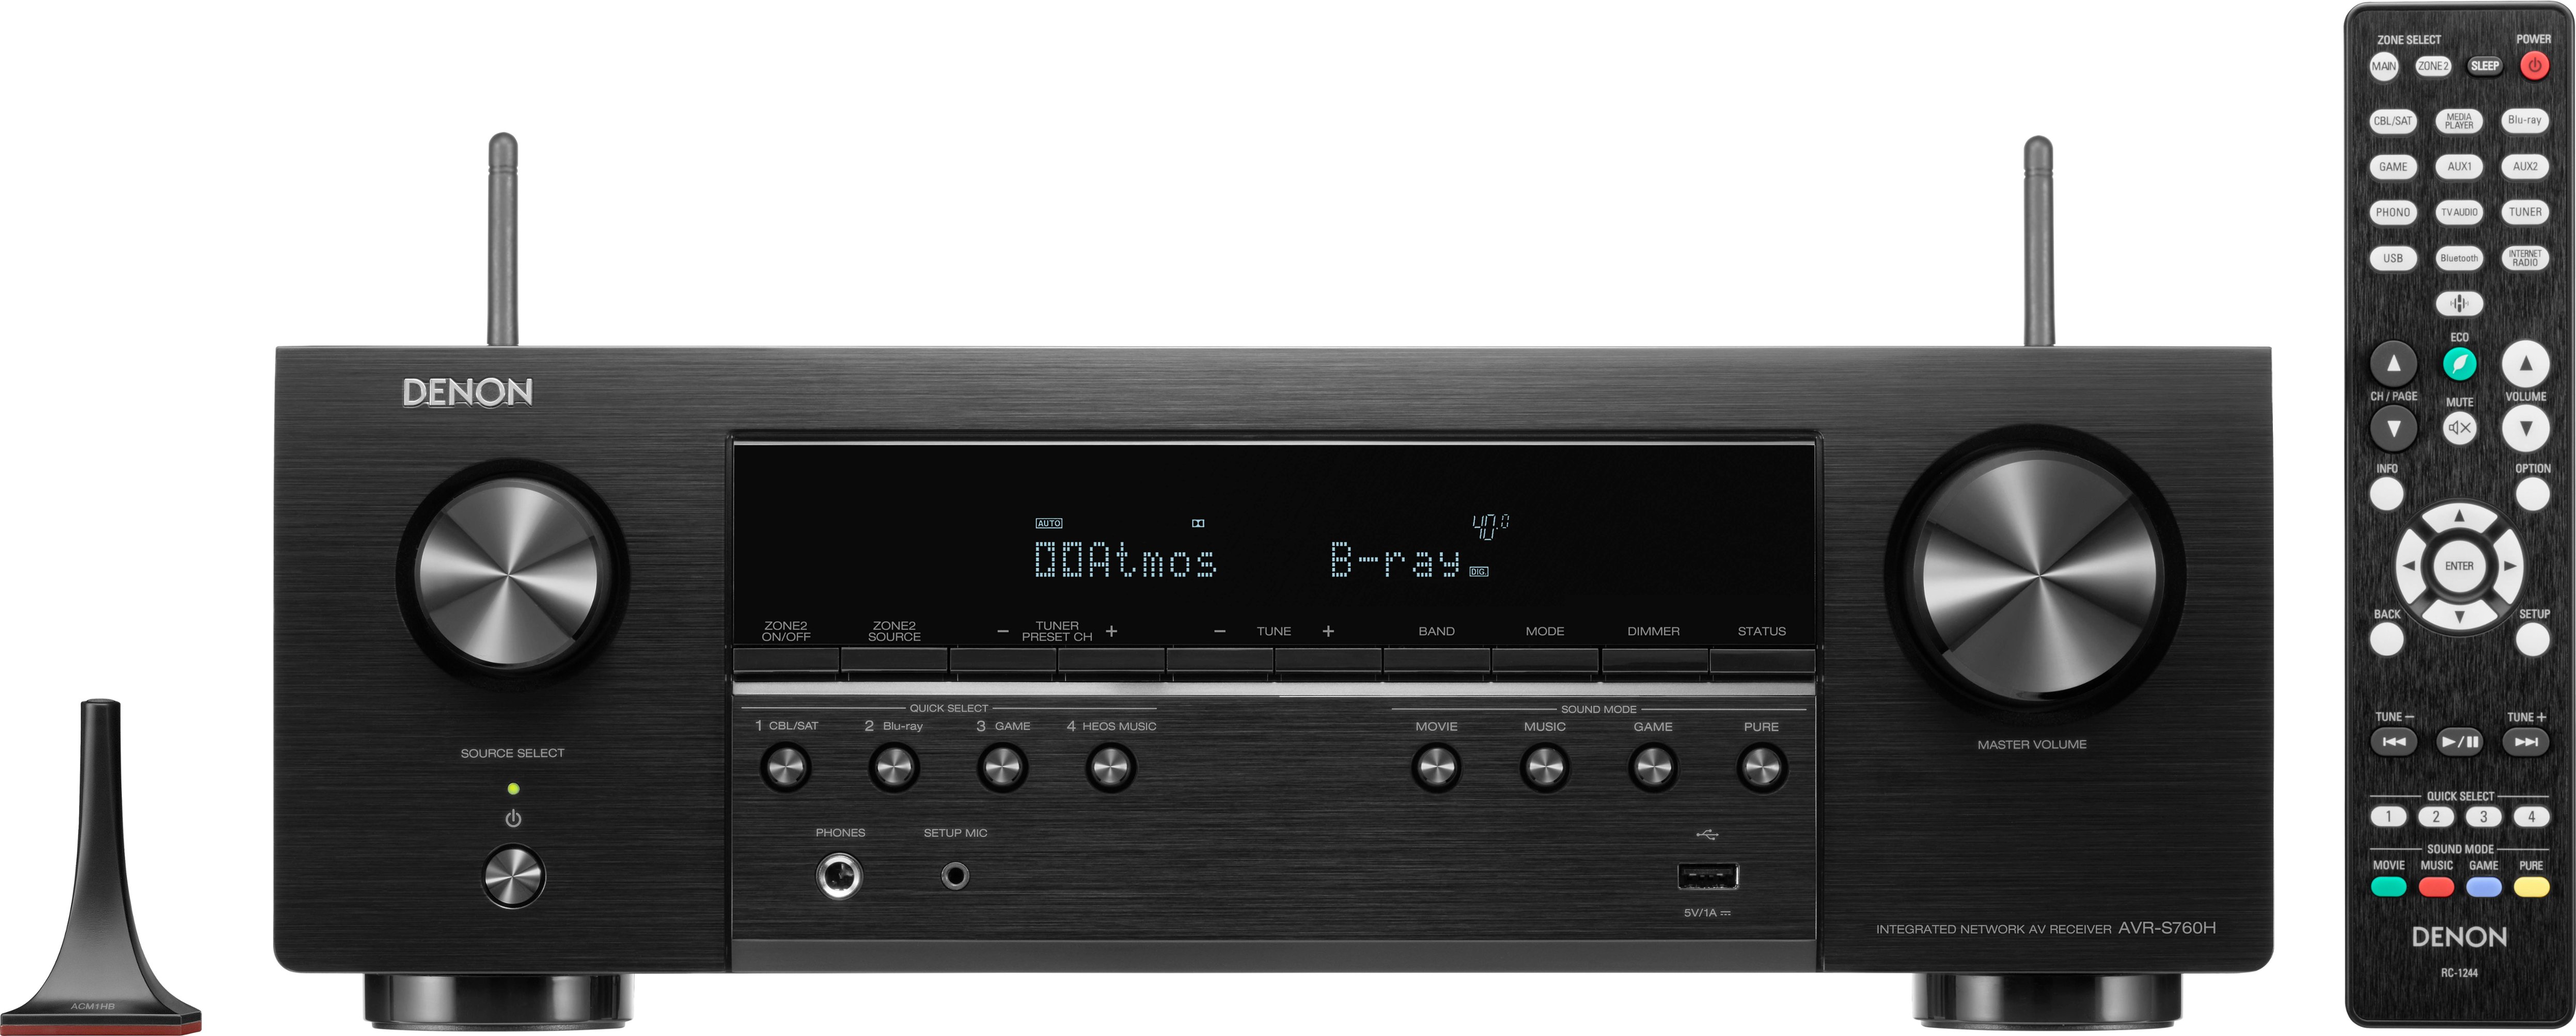 Denon AVR-S760H (75W X Atmos Best 8K Black Ultra Compatible Alexa Buy HD AV - 7) and Receiver 7.2-Ch. with Dolby AVR-S760H Home with HEOS Theater HDR